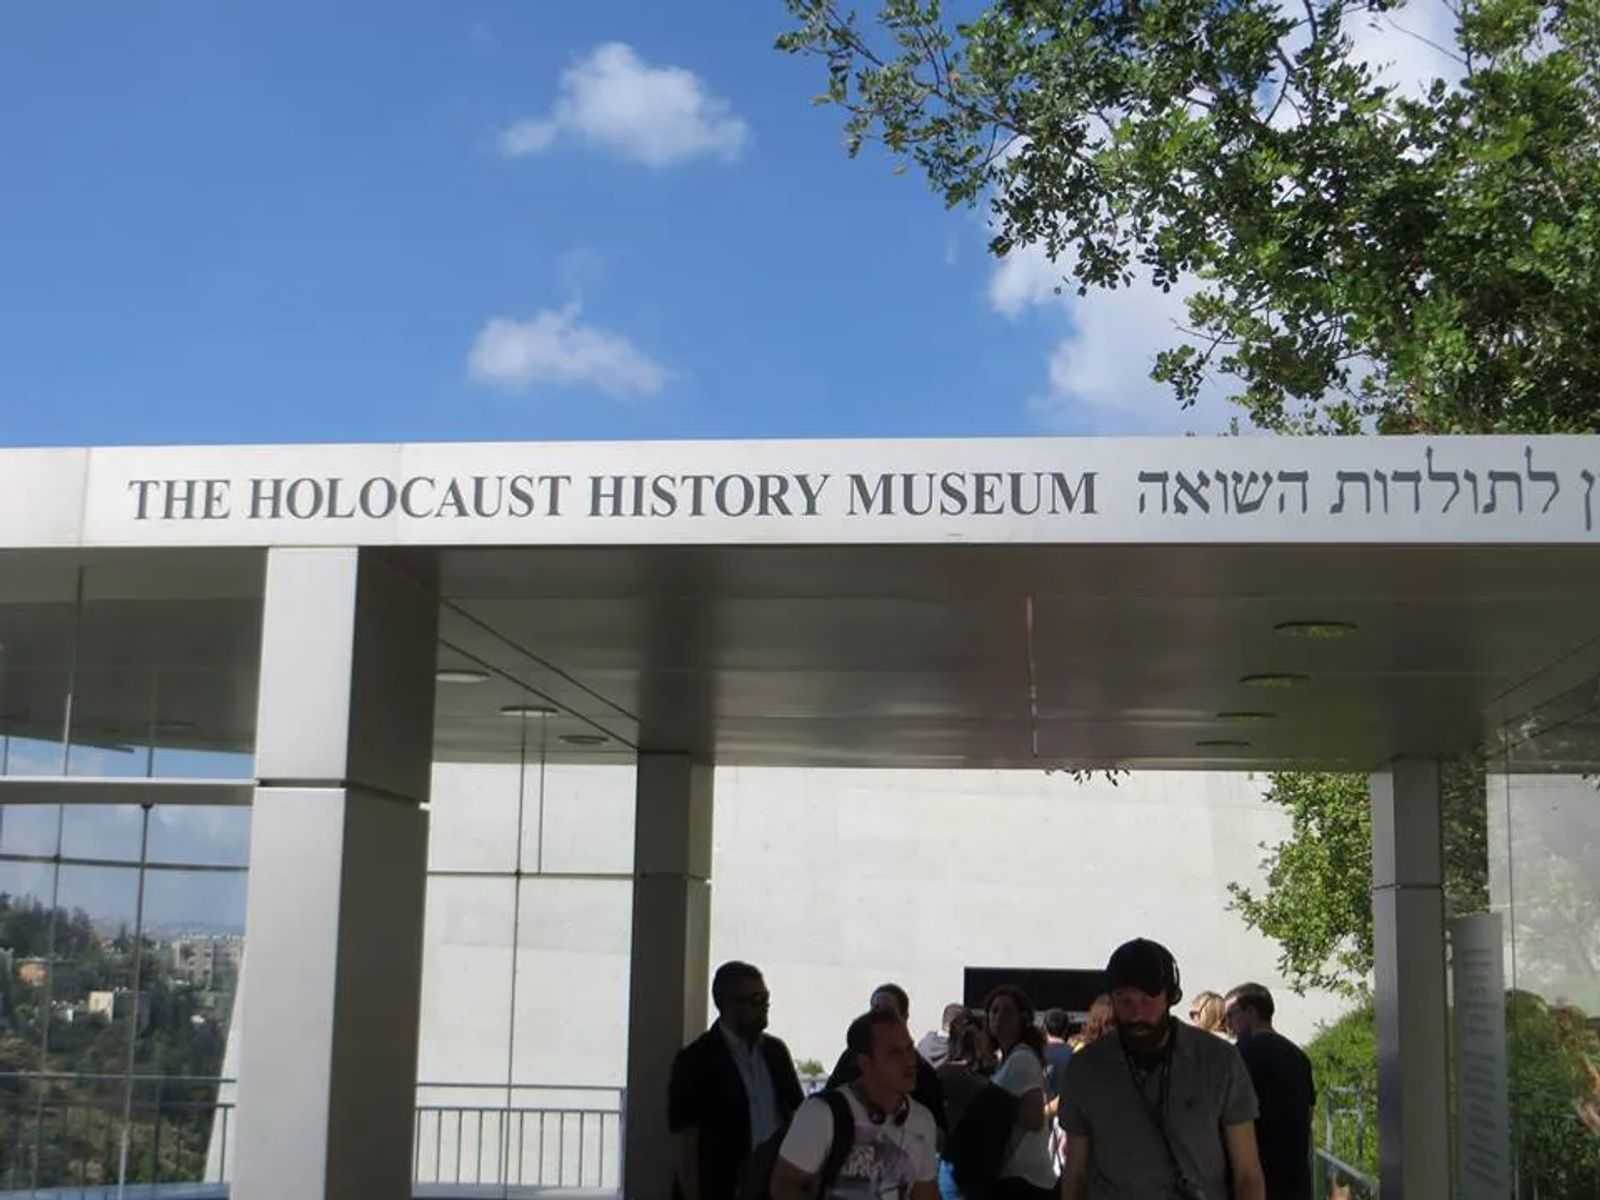 Entrance to the holocaust Museum